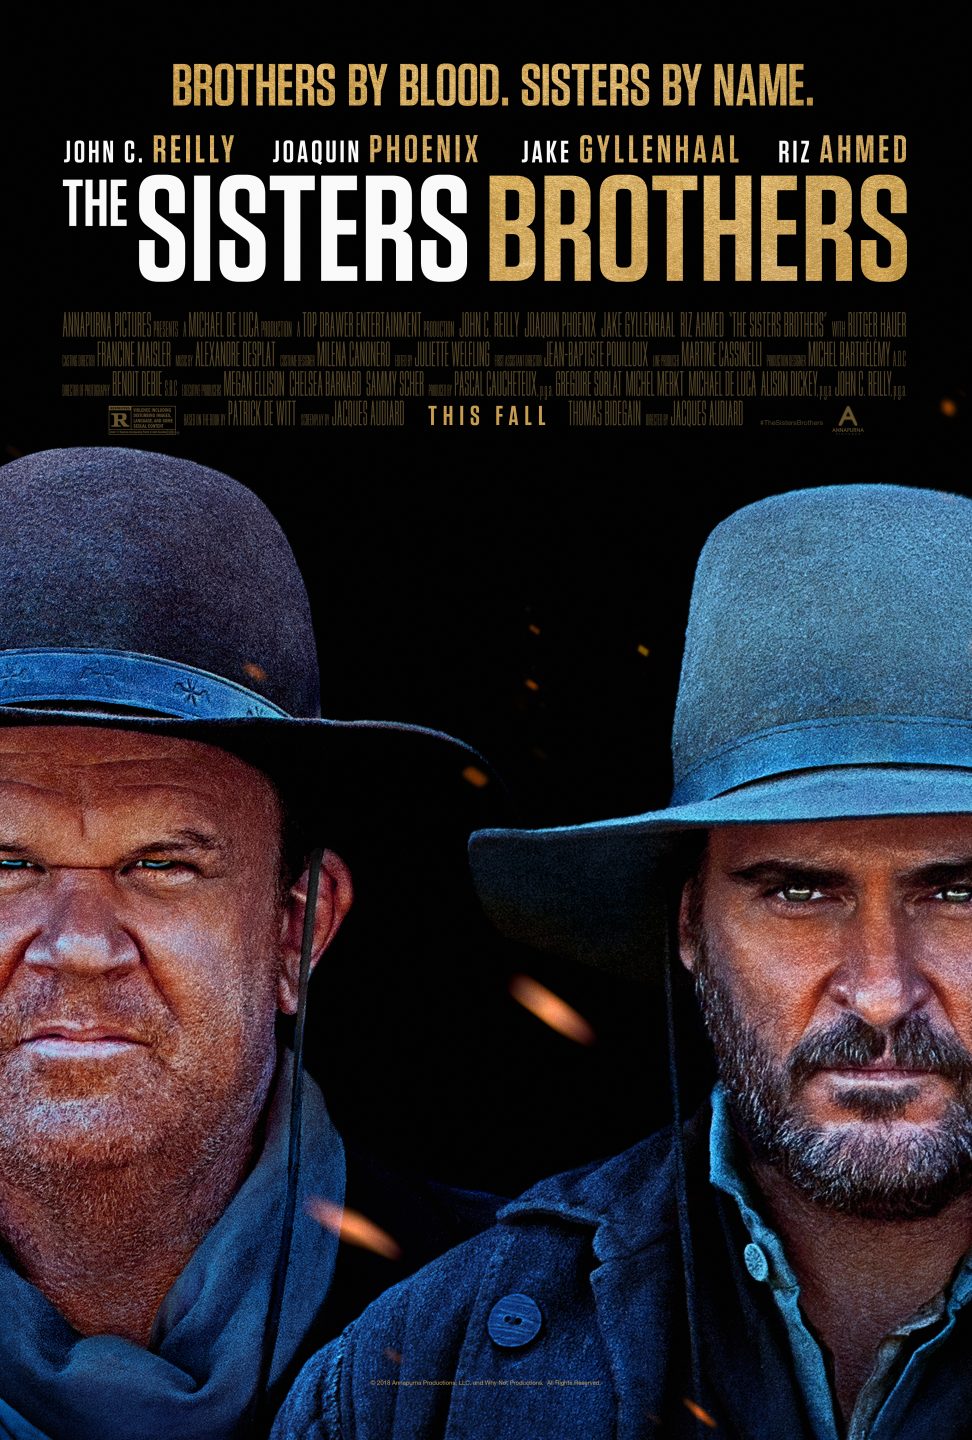 The Sisters Brothers poster (Annapurna Pictures)